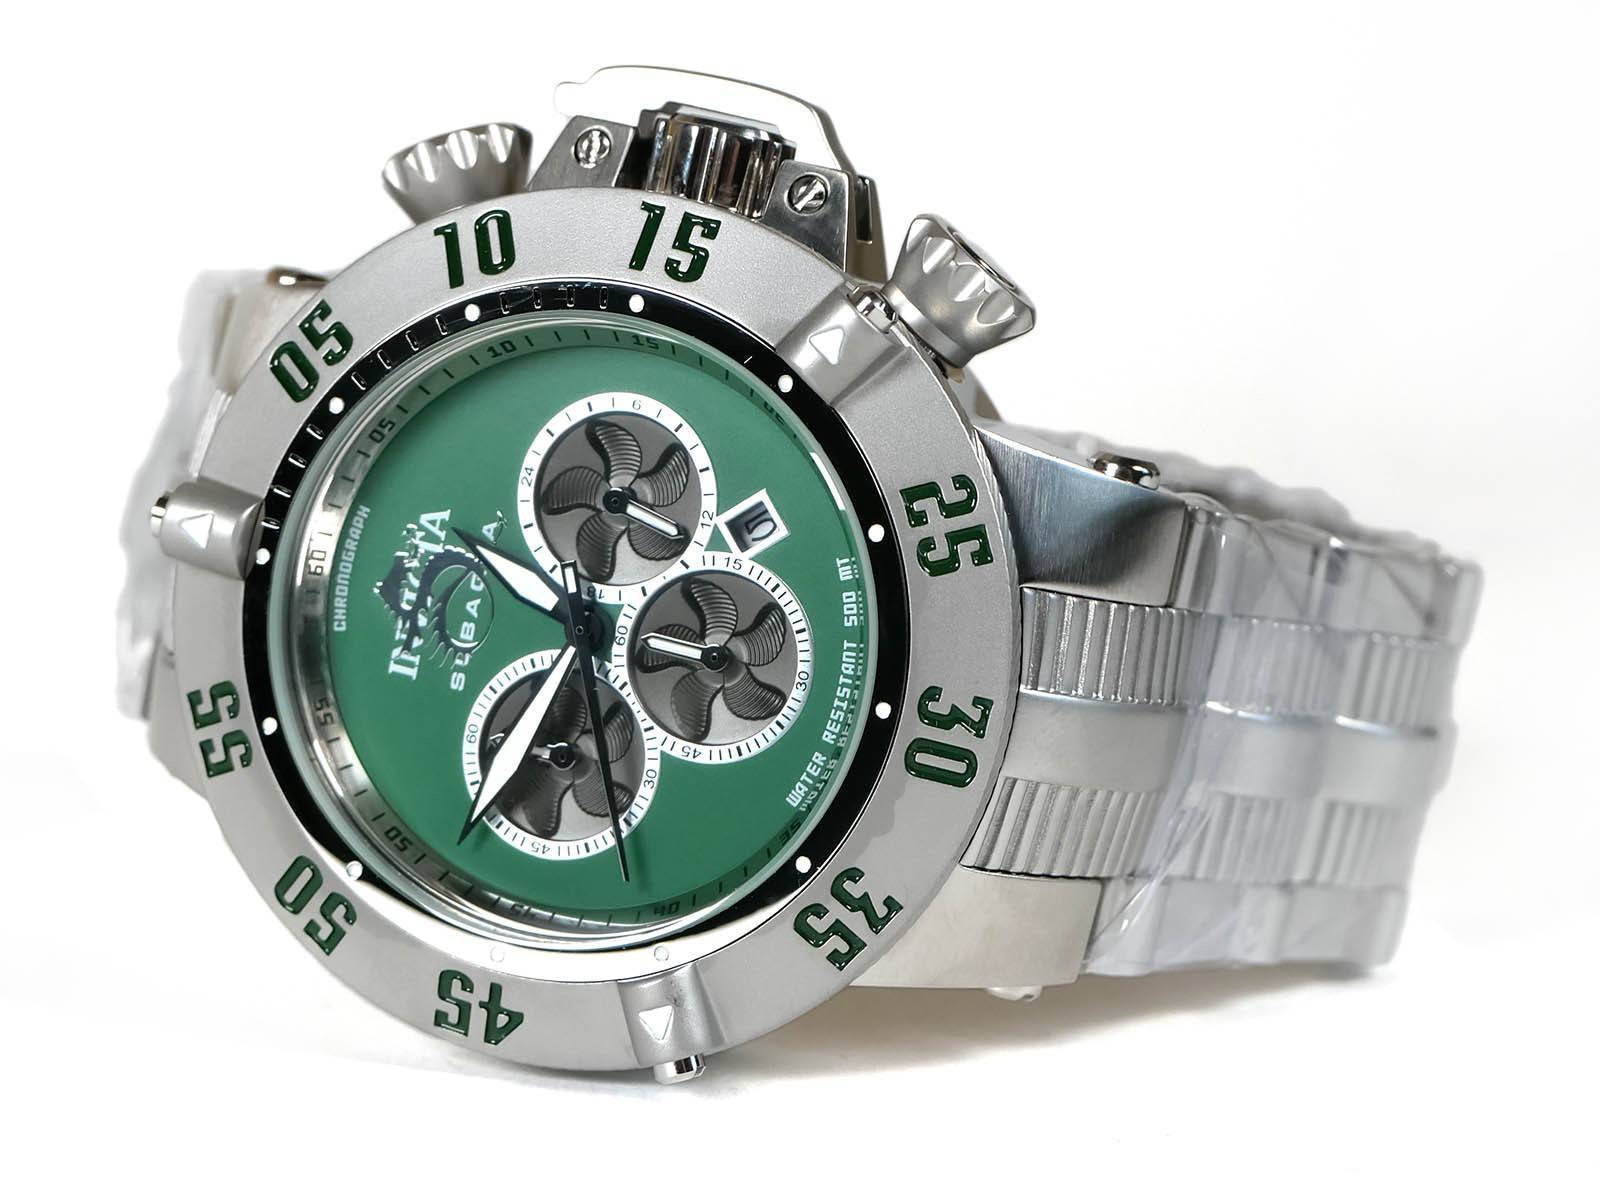 Invicta Watch to Launch U.S. Army Line | Total Licensing